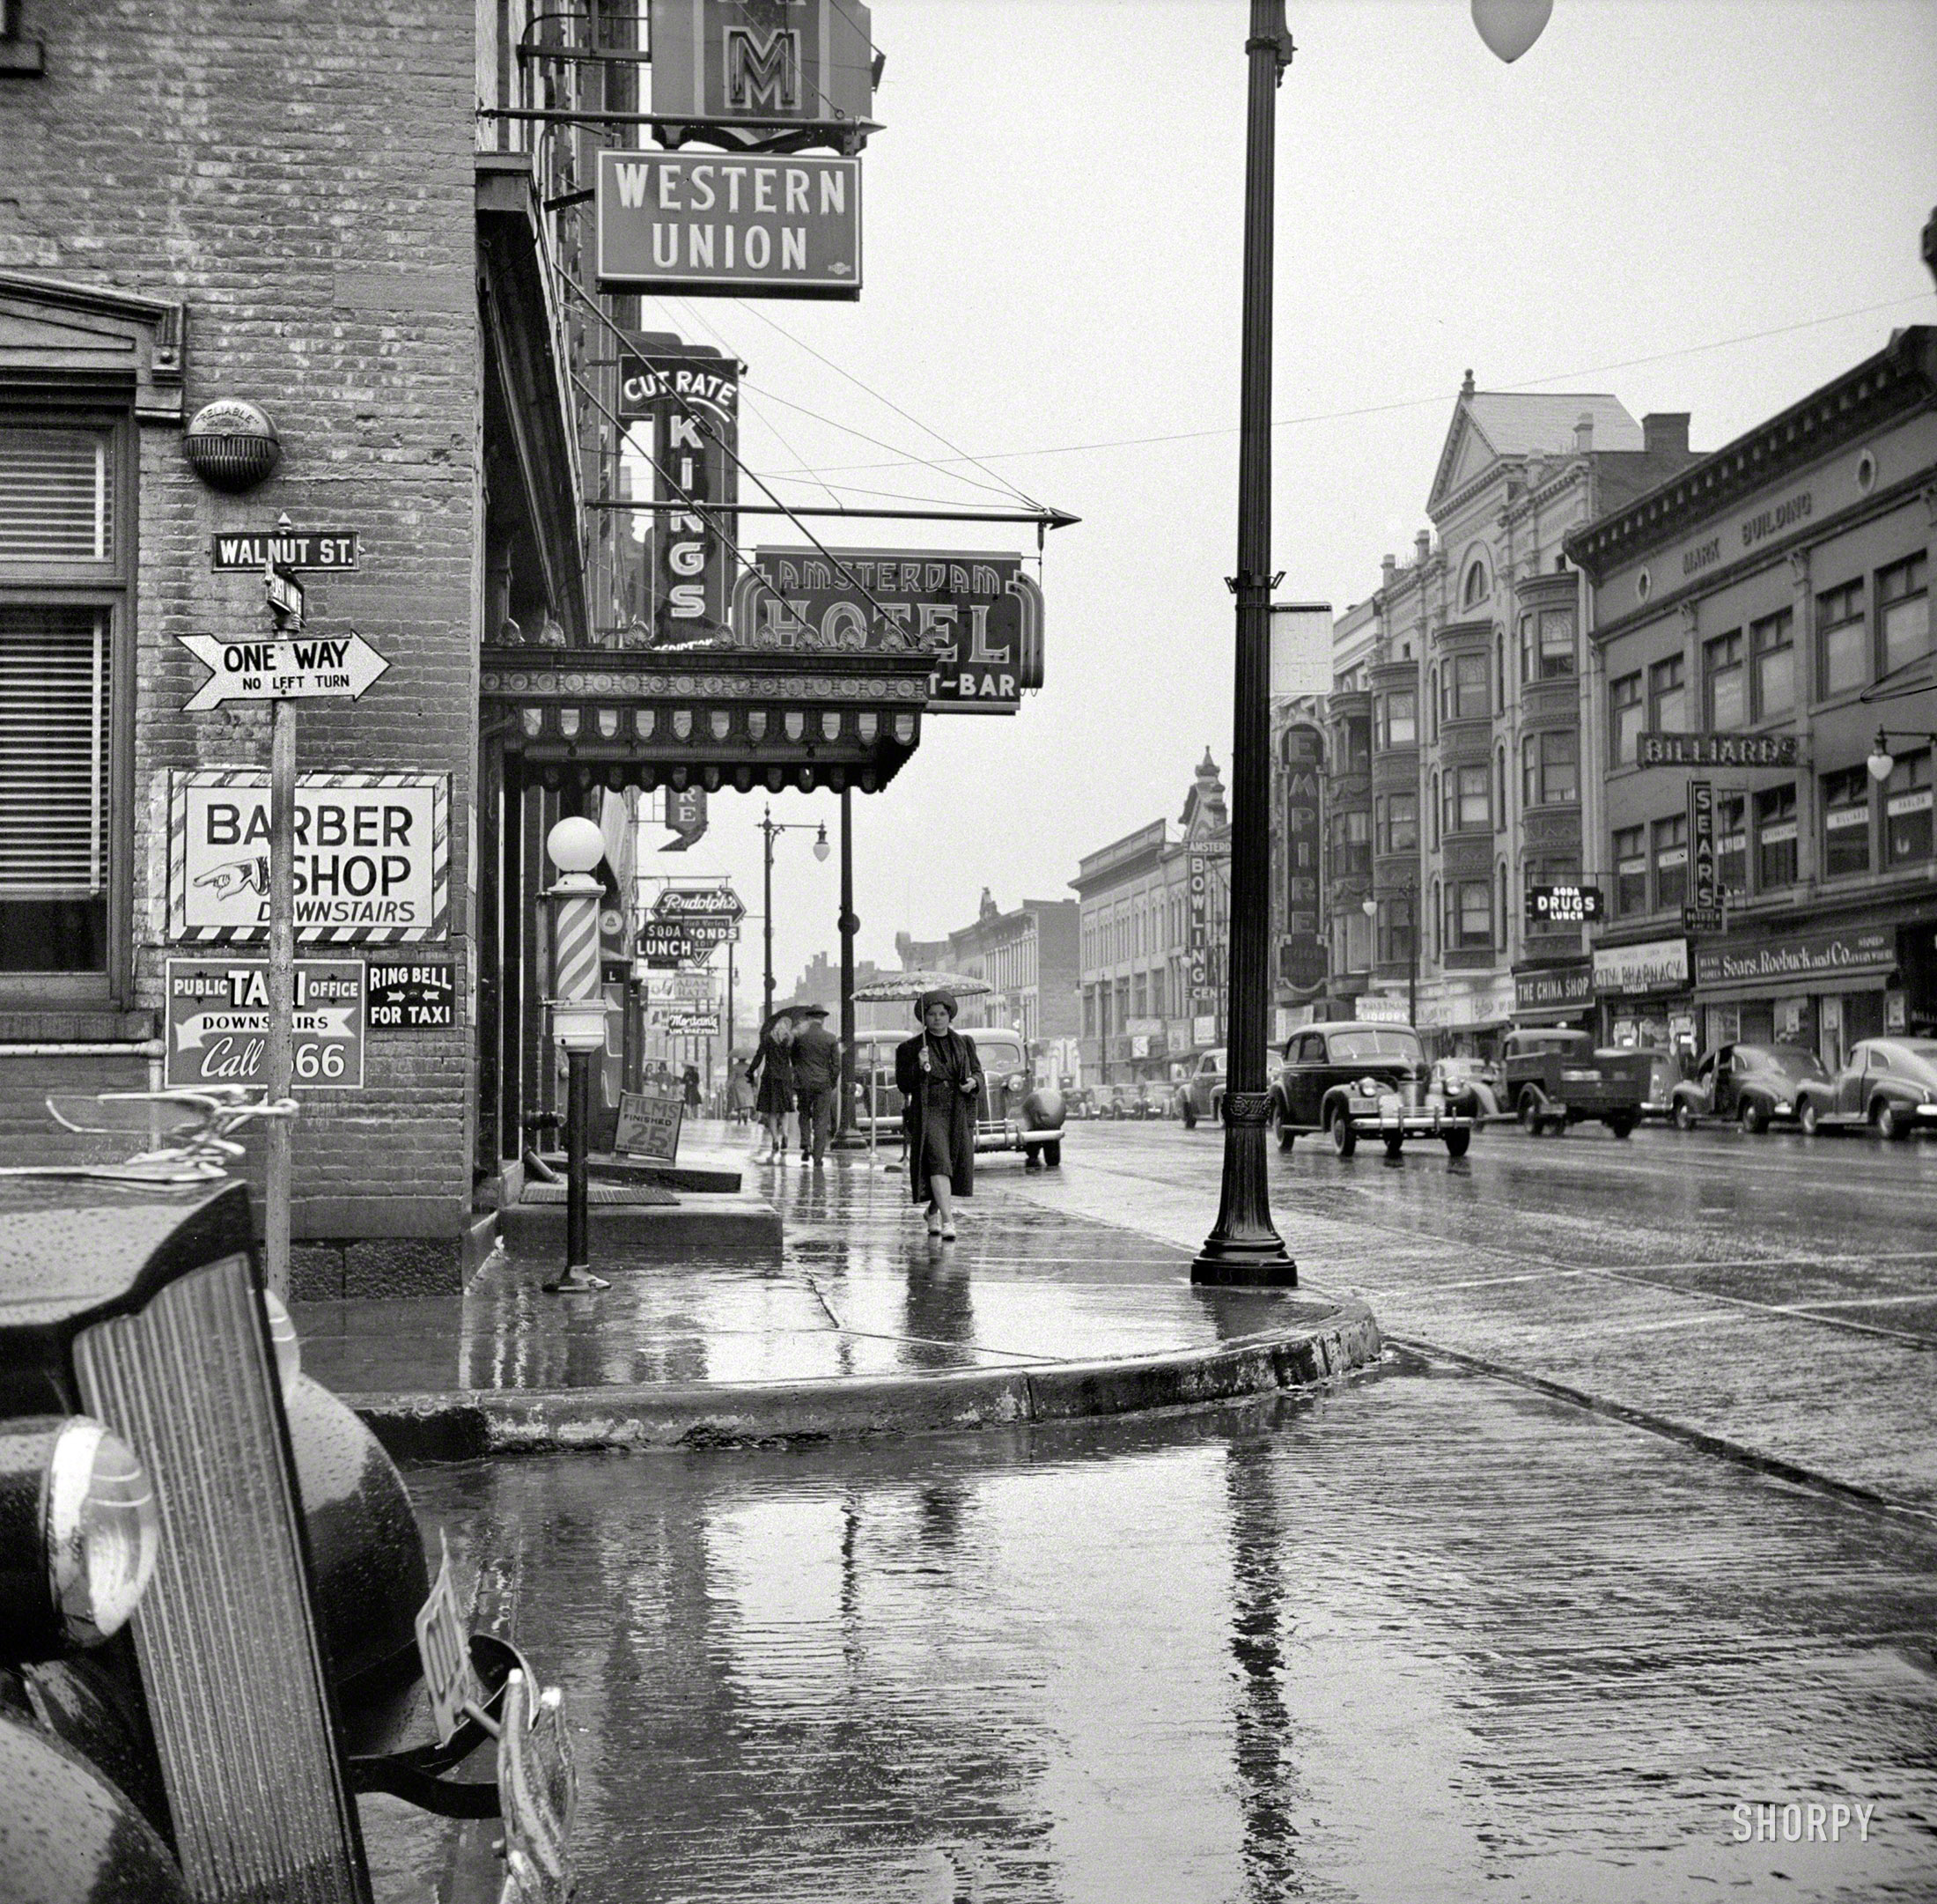 October 1941. "Amsterdam, New York." Walnut and East Main on a rainy day. Dare you to "Ring Bell for Taxi." Photo by John Collier. View full size.